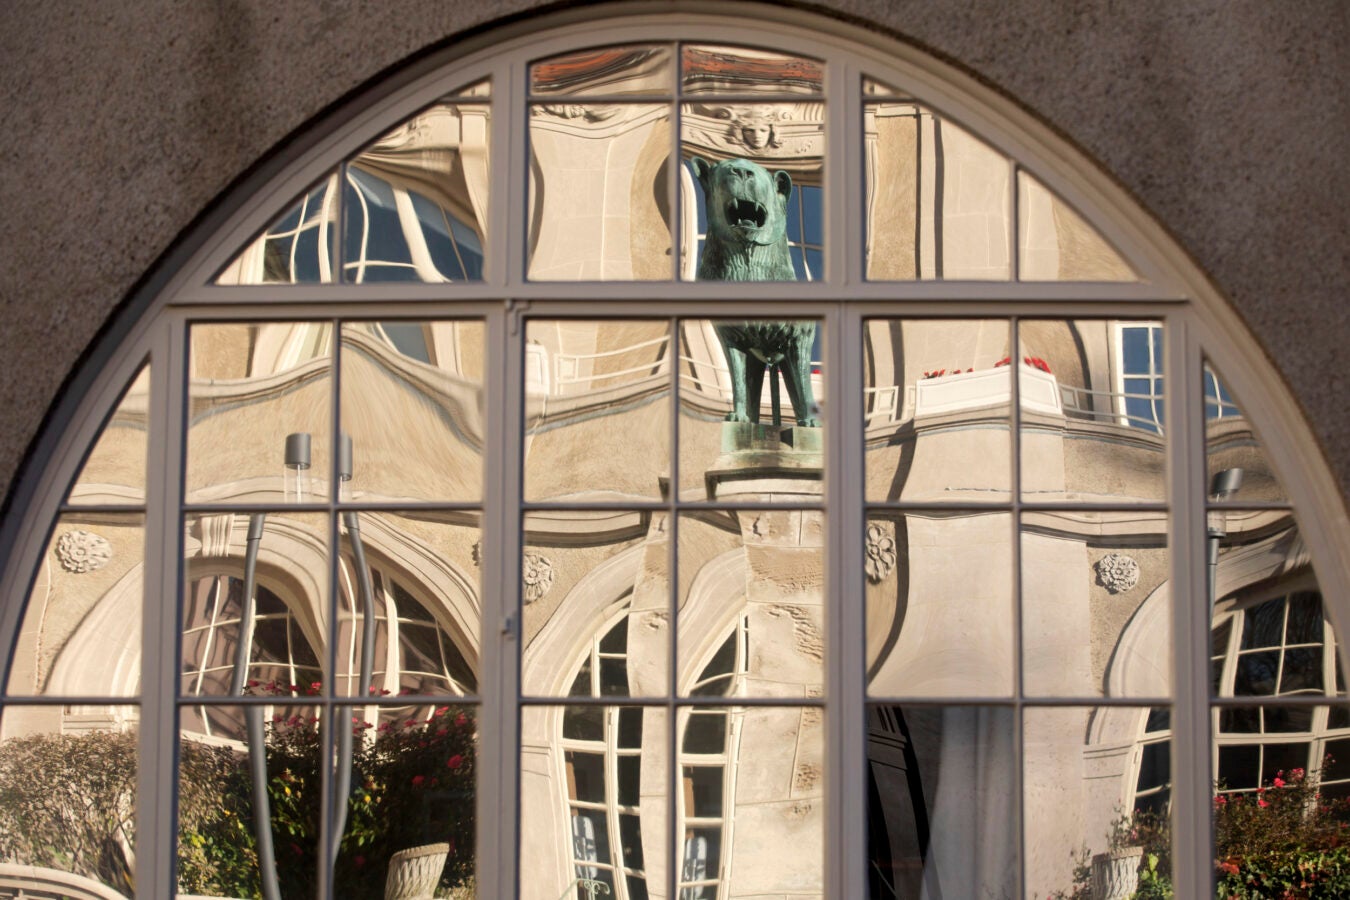 Mirrored windows are pictured in the Adolphus Busch Hall courtyard.